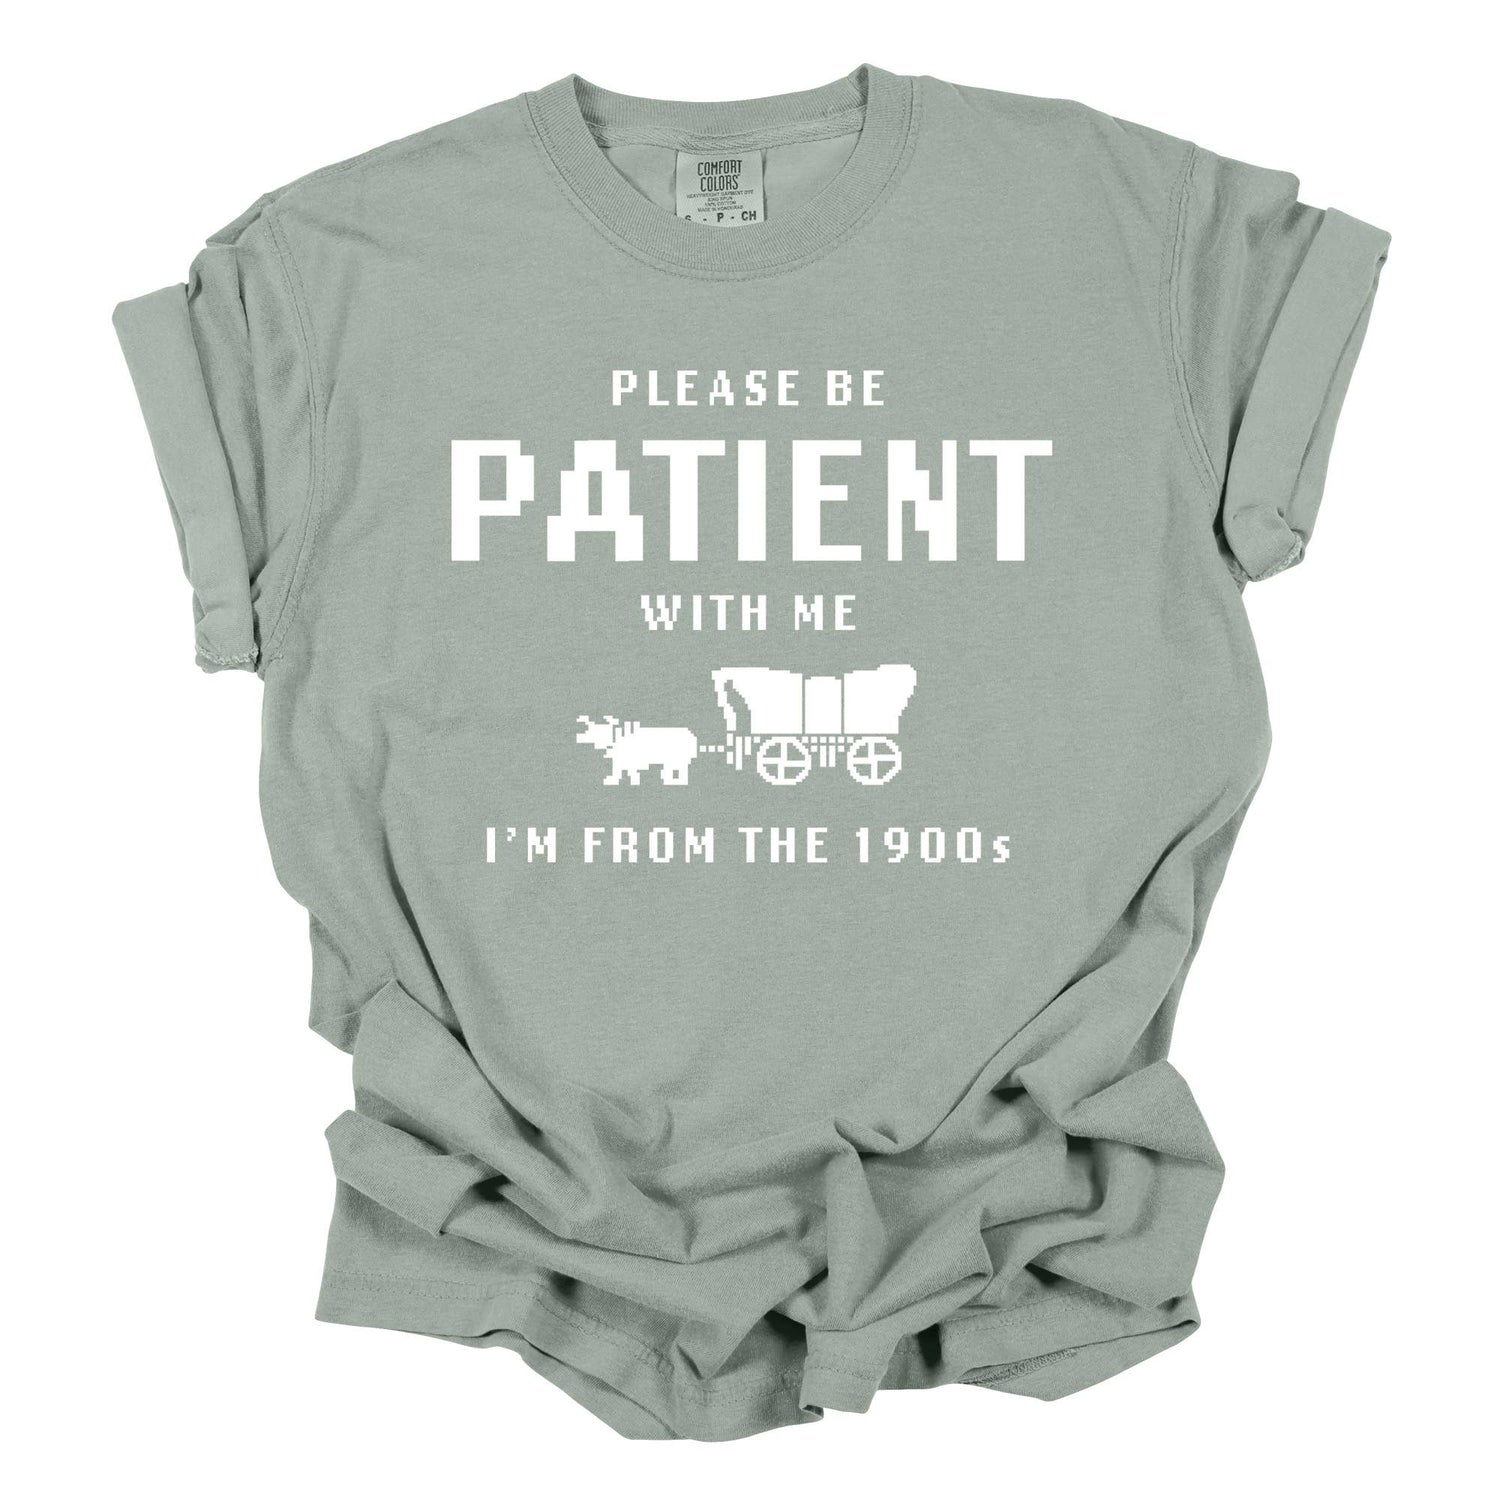 I'm From the 1900s Funny Shirt, Funny Graphic Tee, patient: 2X-Large / Bay - Storm and Sky Shoppe